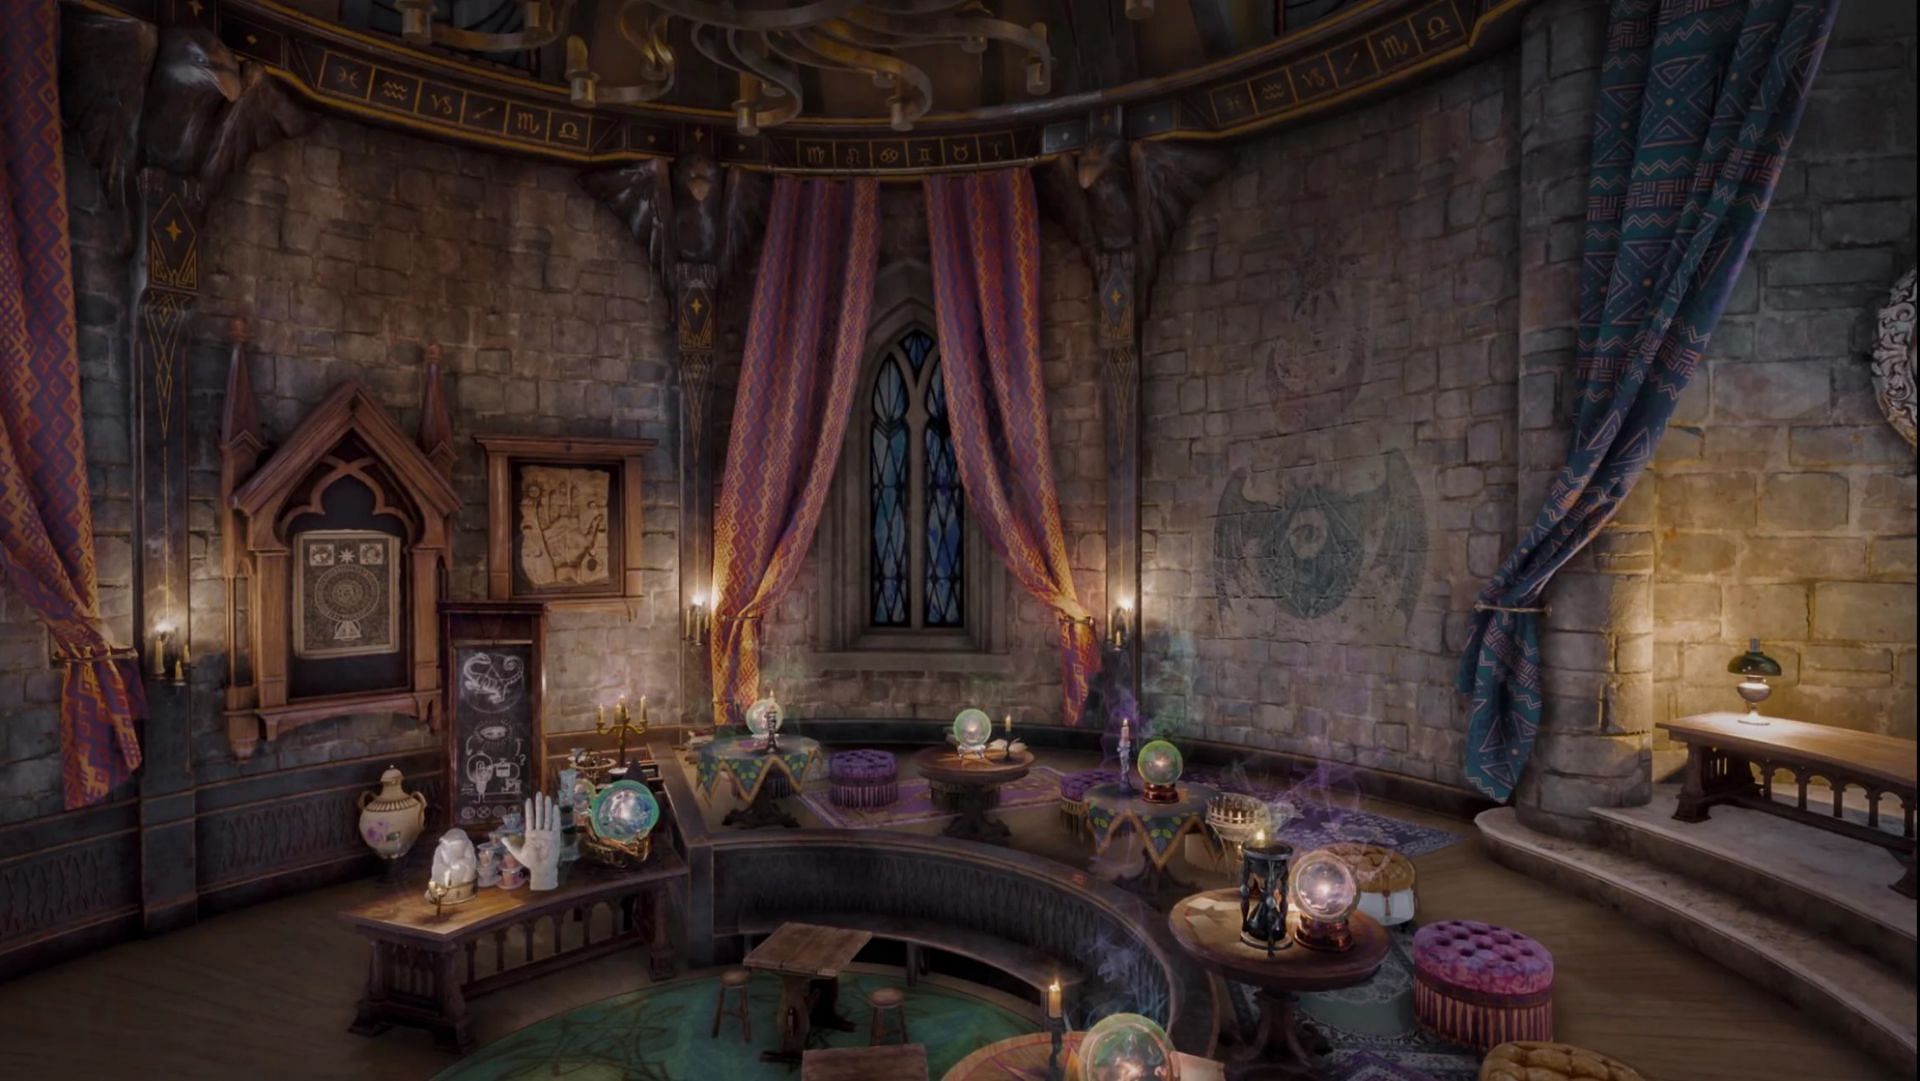 What can you do in the classroom at Hogwarts Legacy?